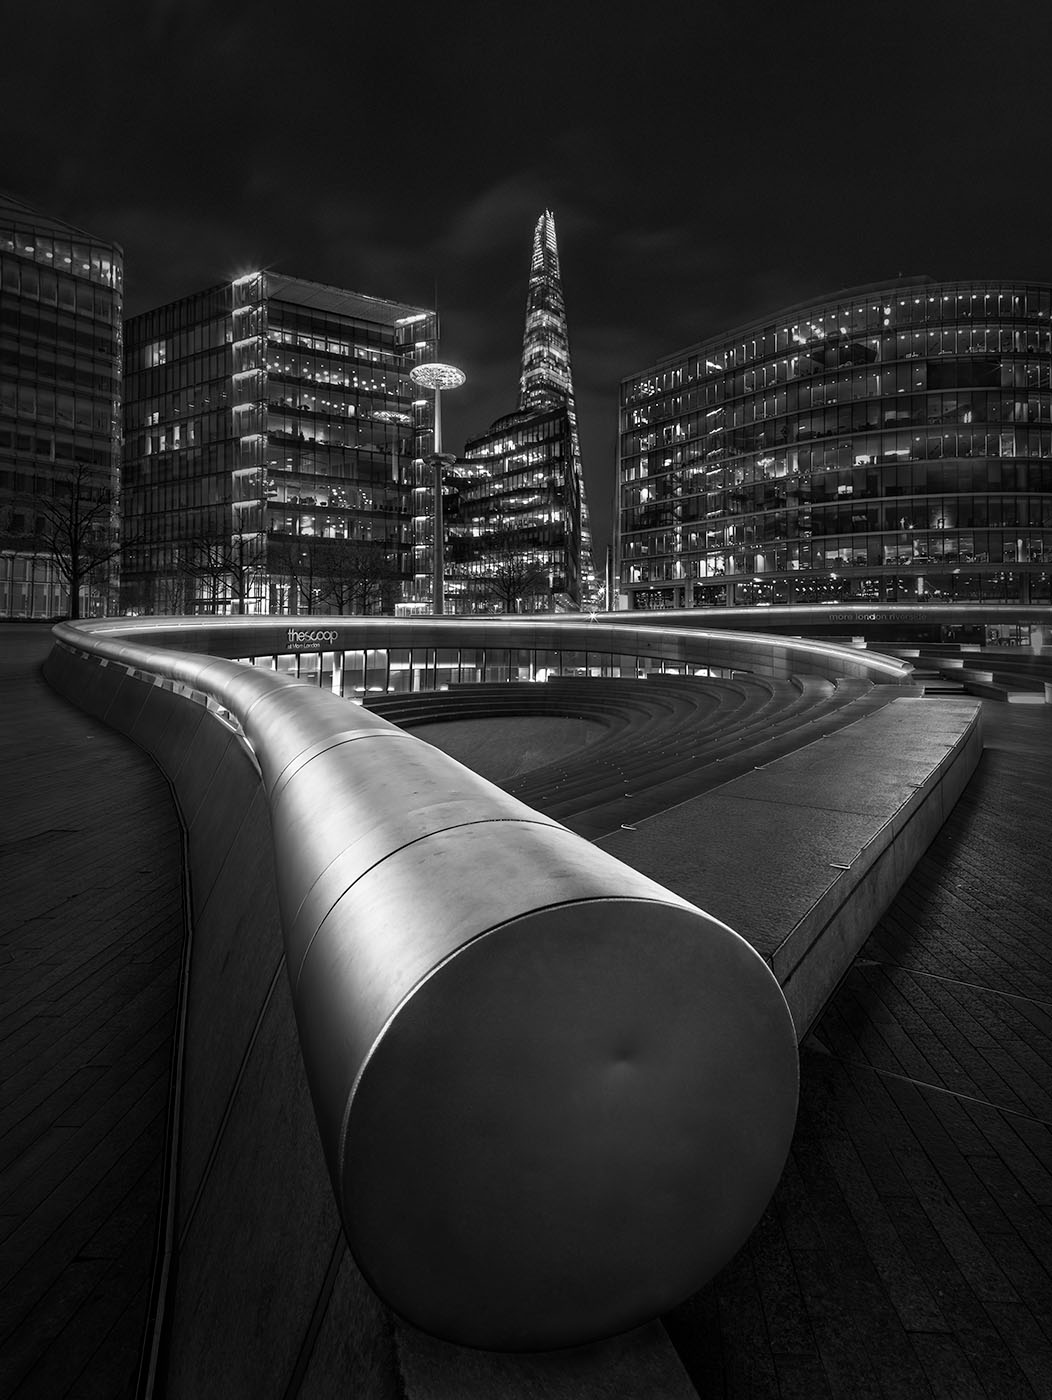 More London The Scoop and Shard - complete guide to night photography